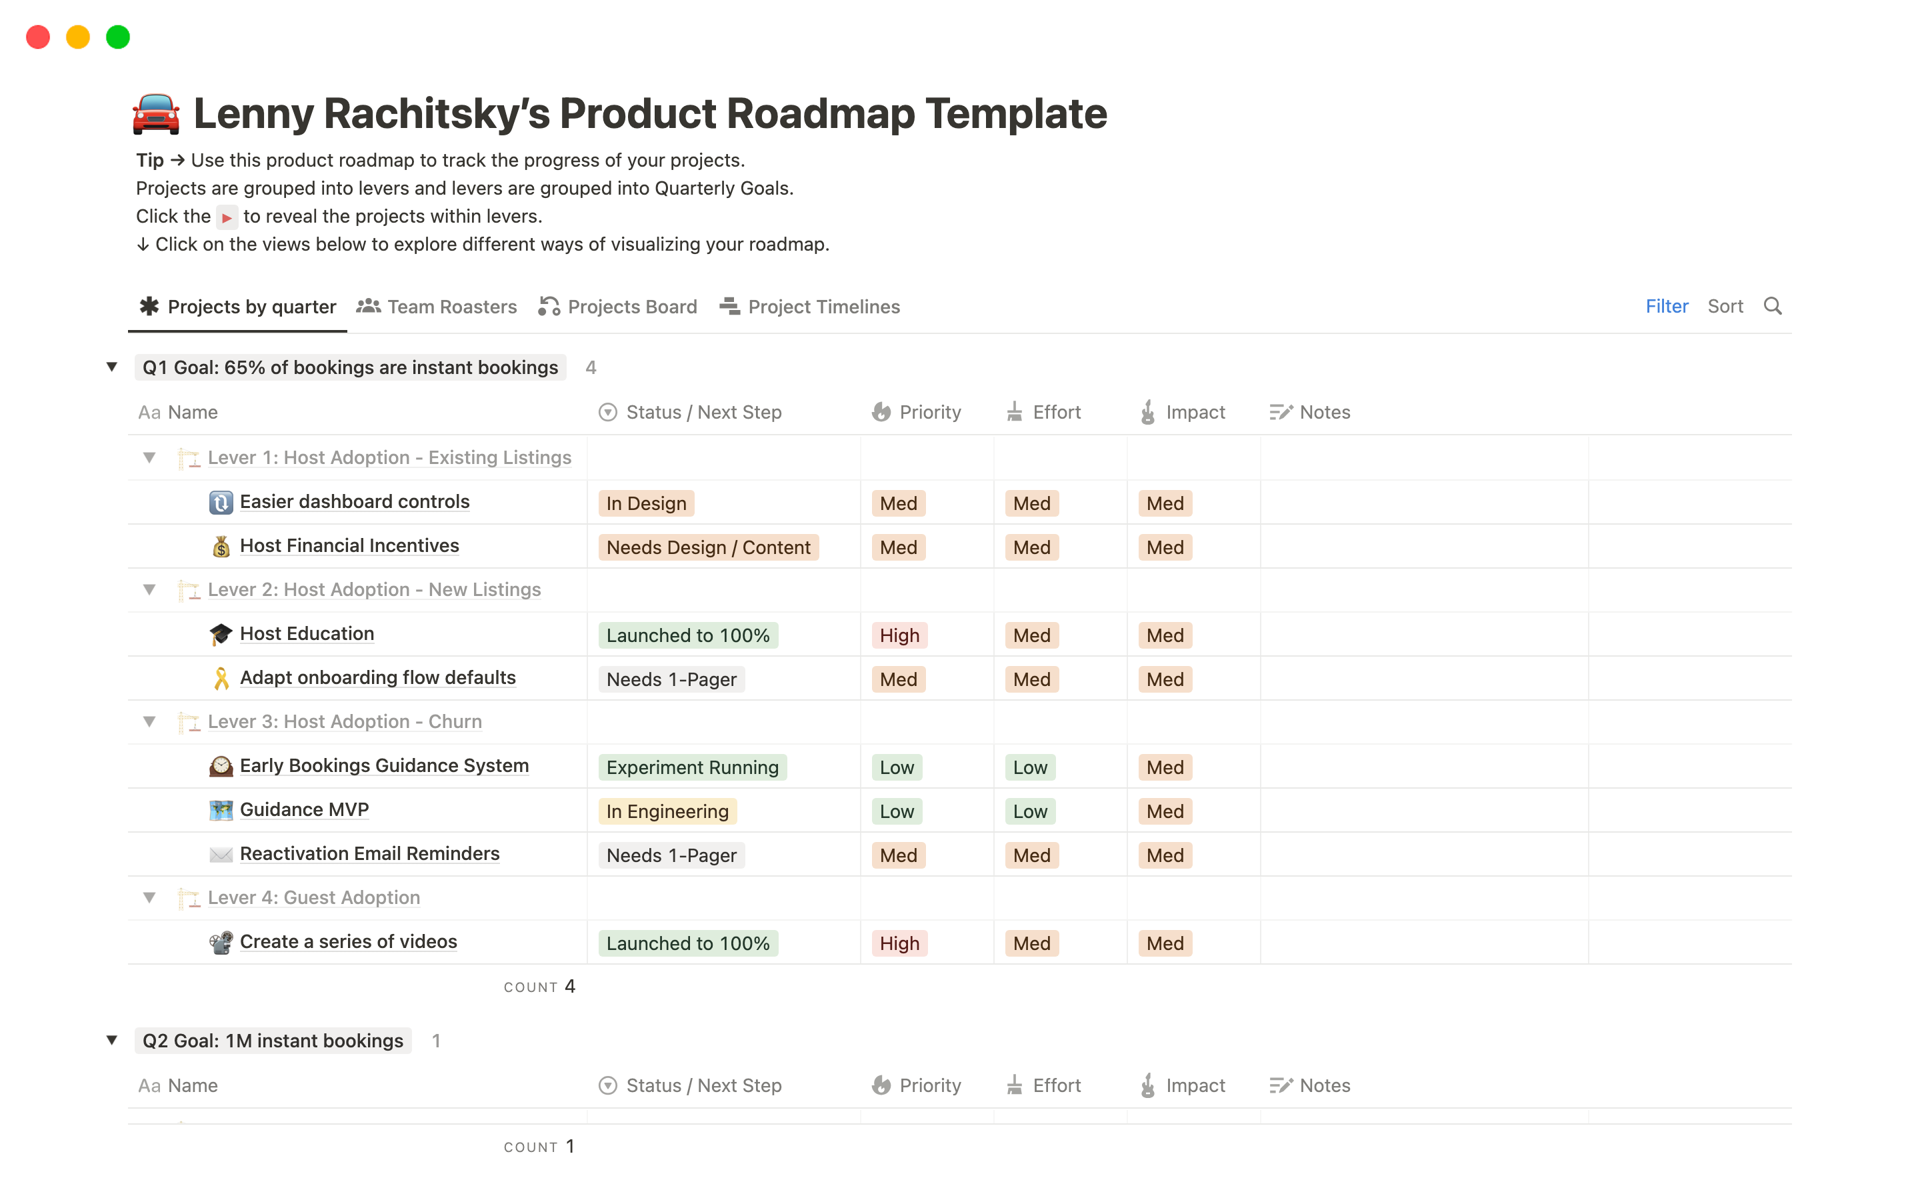 Use this product roadmap to track the progress of your projects.